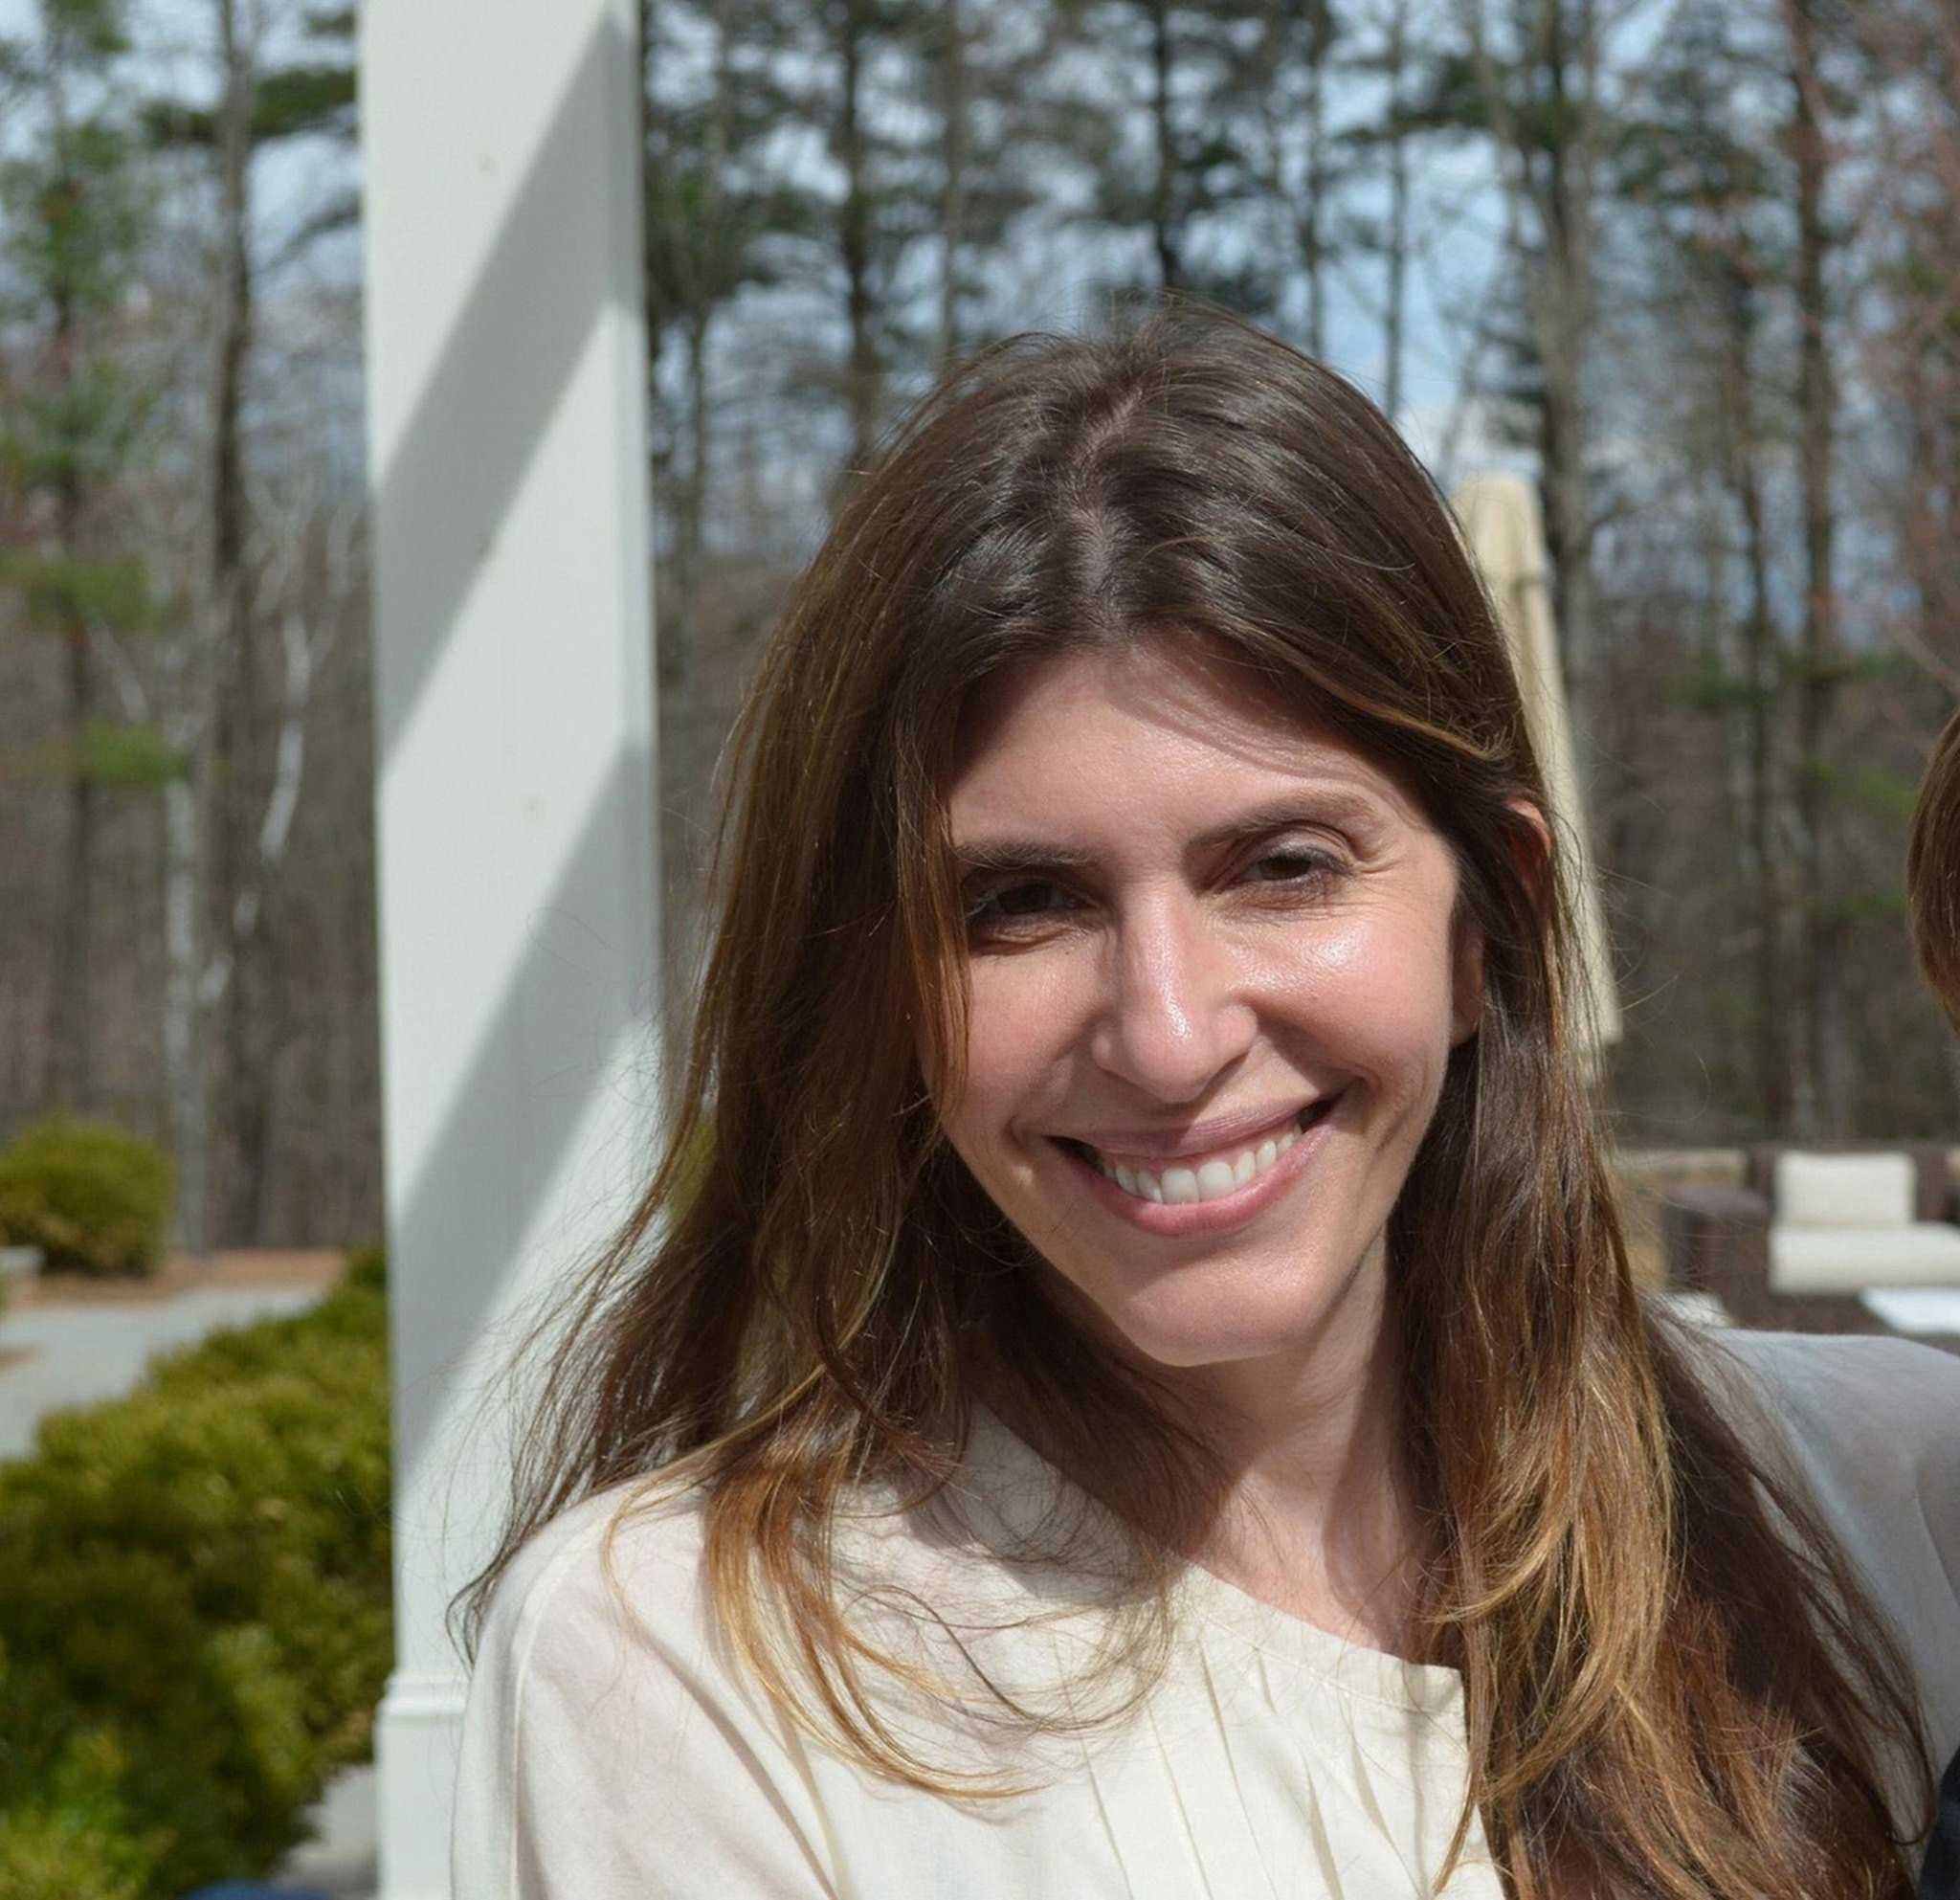 Who Was Jennifer Dulos American Woman Went Missing In 2019 Husband and Girlfriend Was Charged Pictures